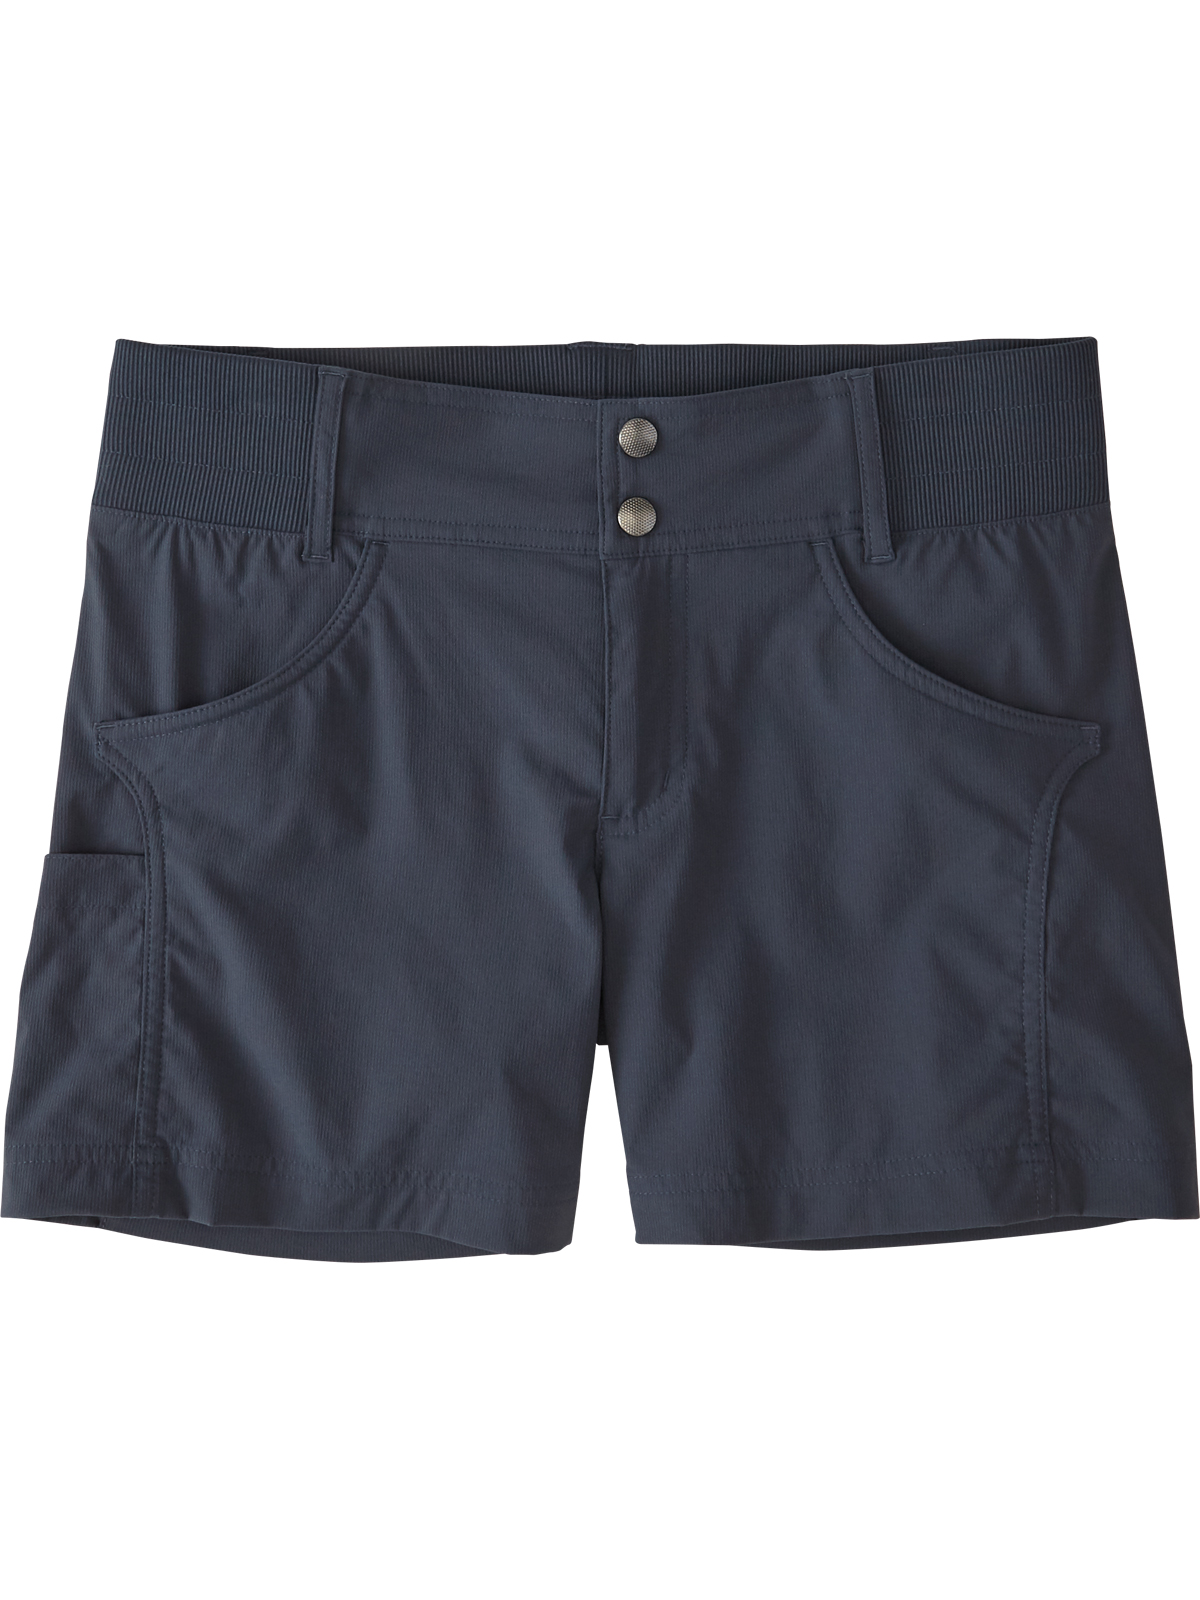 Title Nine Recycled Clamber 2.0 Hiking Shorts 5